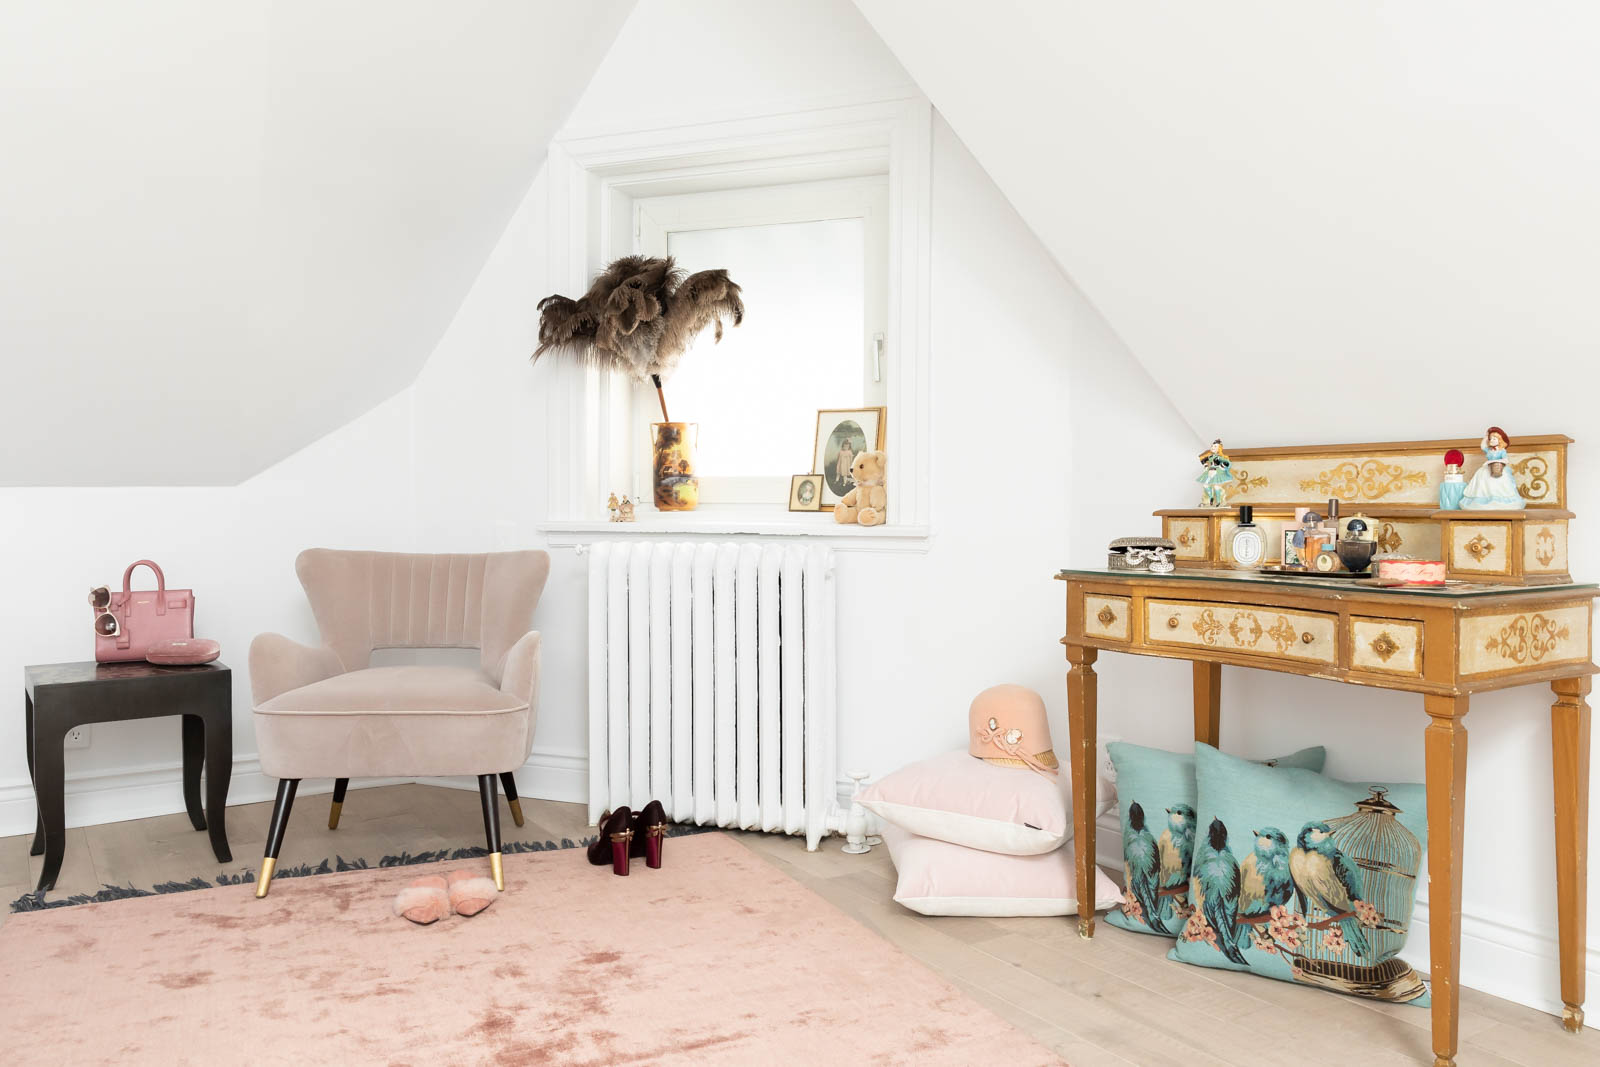 A bedroom with touches of pink